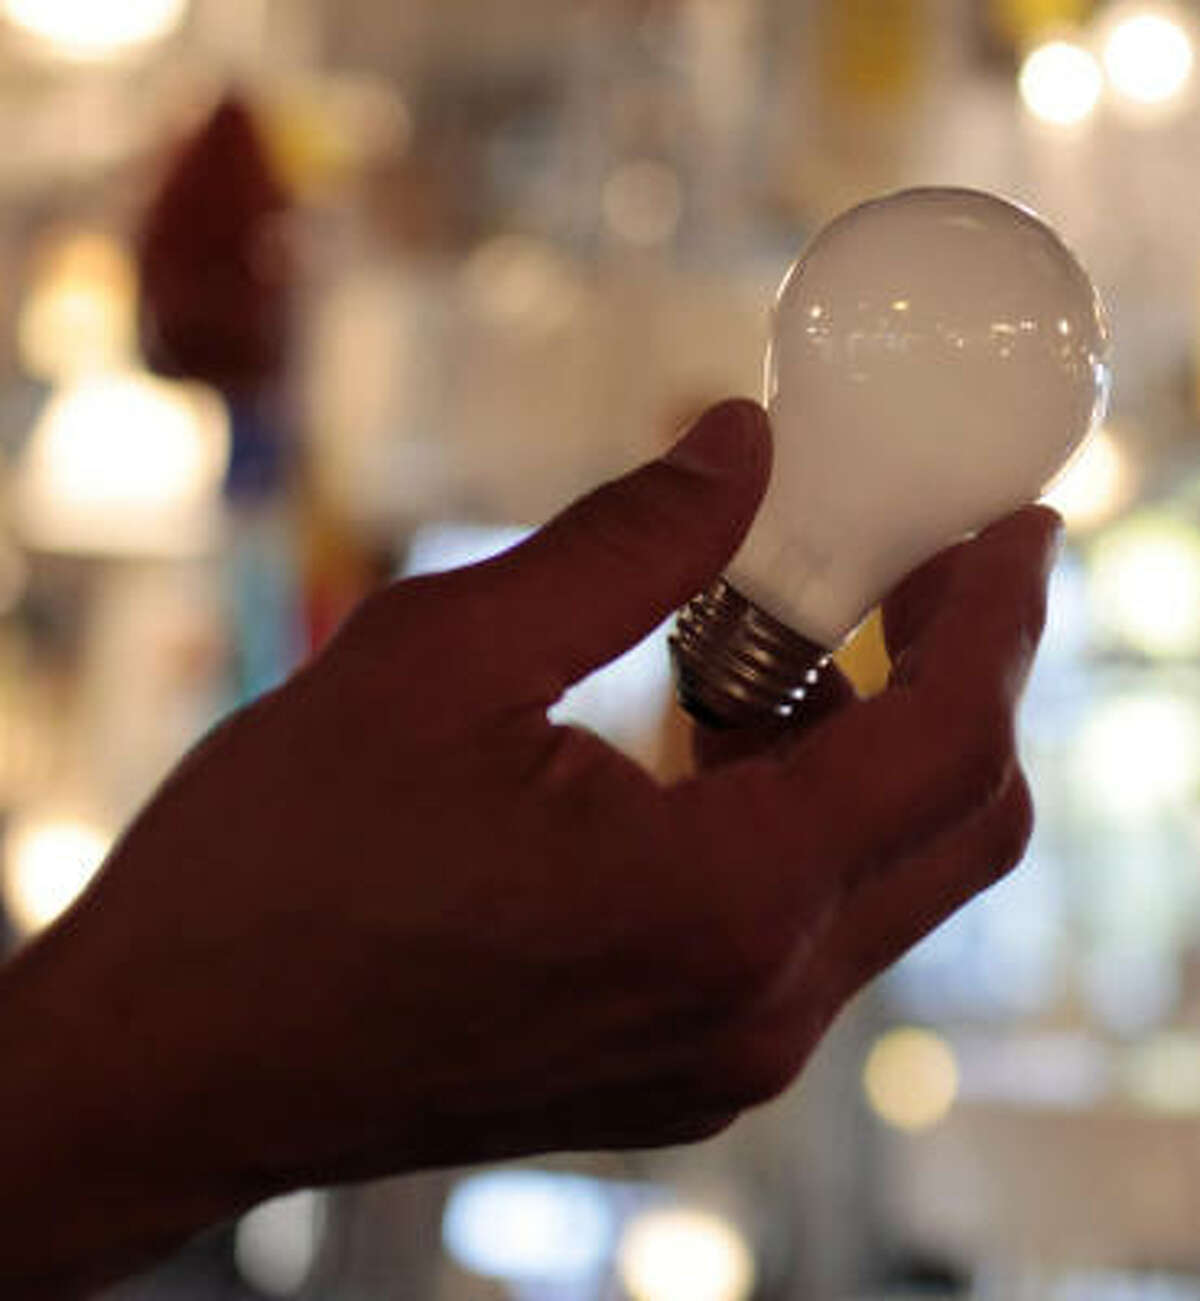 This 100-watt incandescent light bulb is used across the country, but a 2007 law places energy-efficiency restrictions on them, encouraging use of fluorescent bulbs.